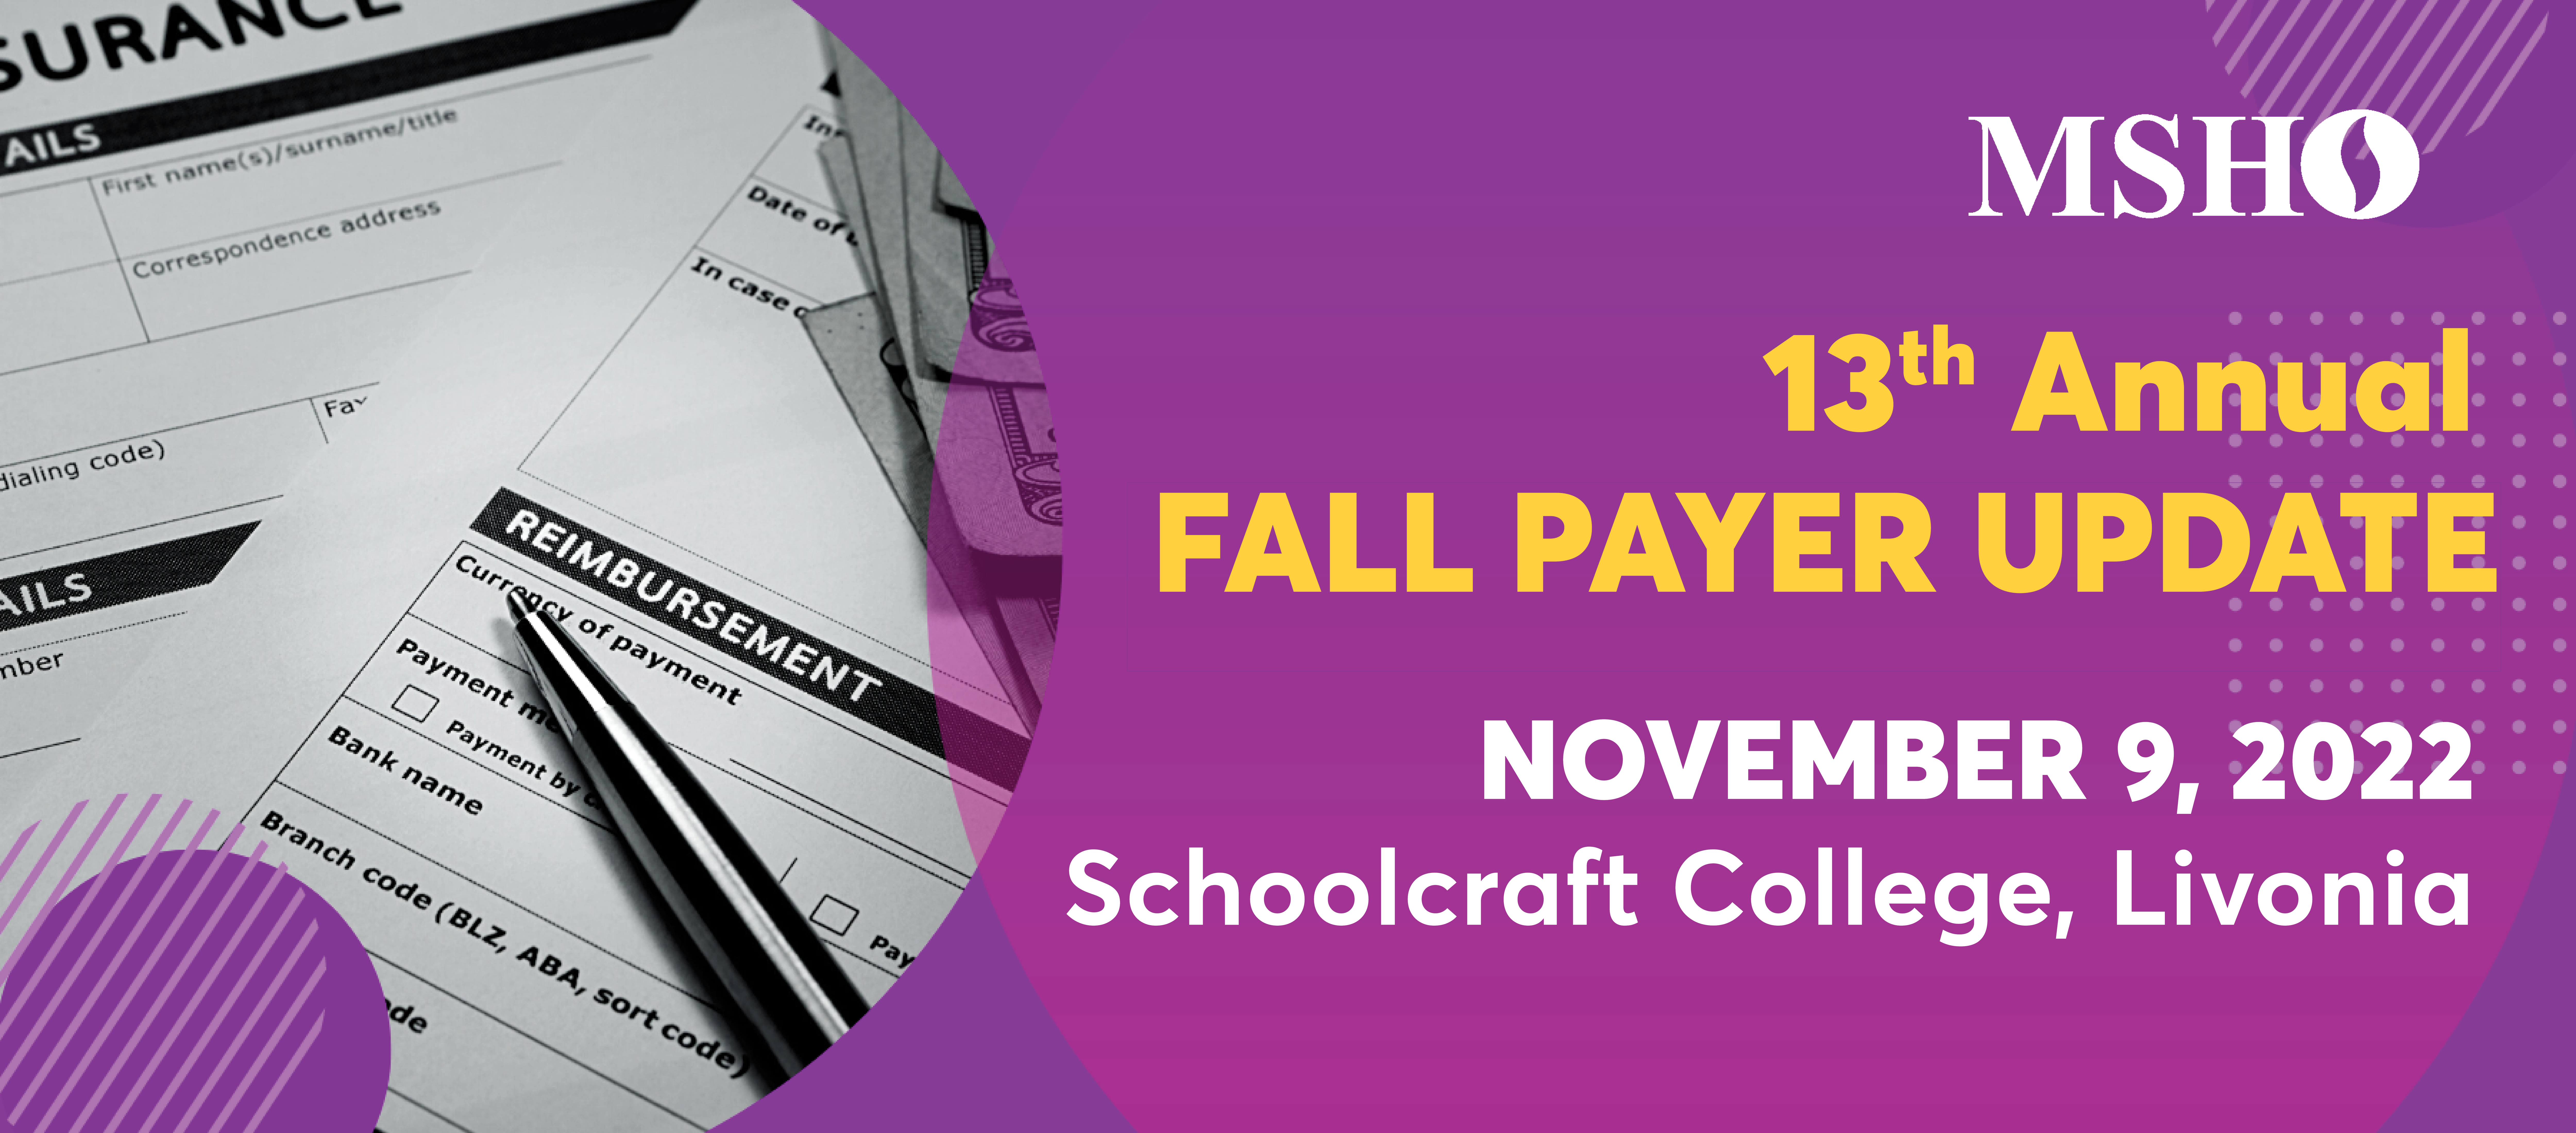 Fall Payer Update